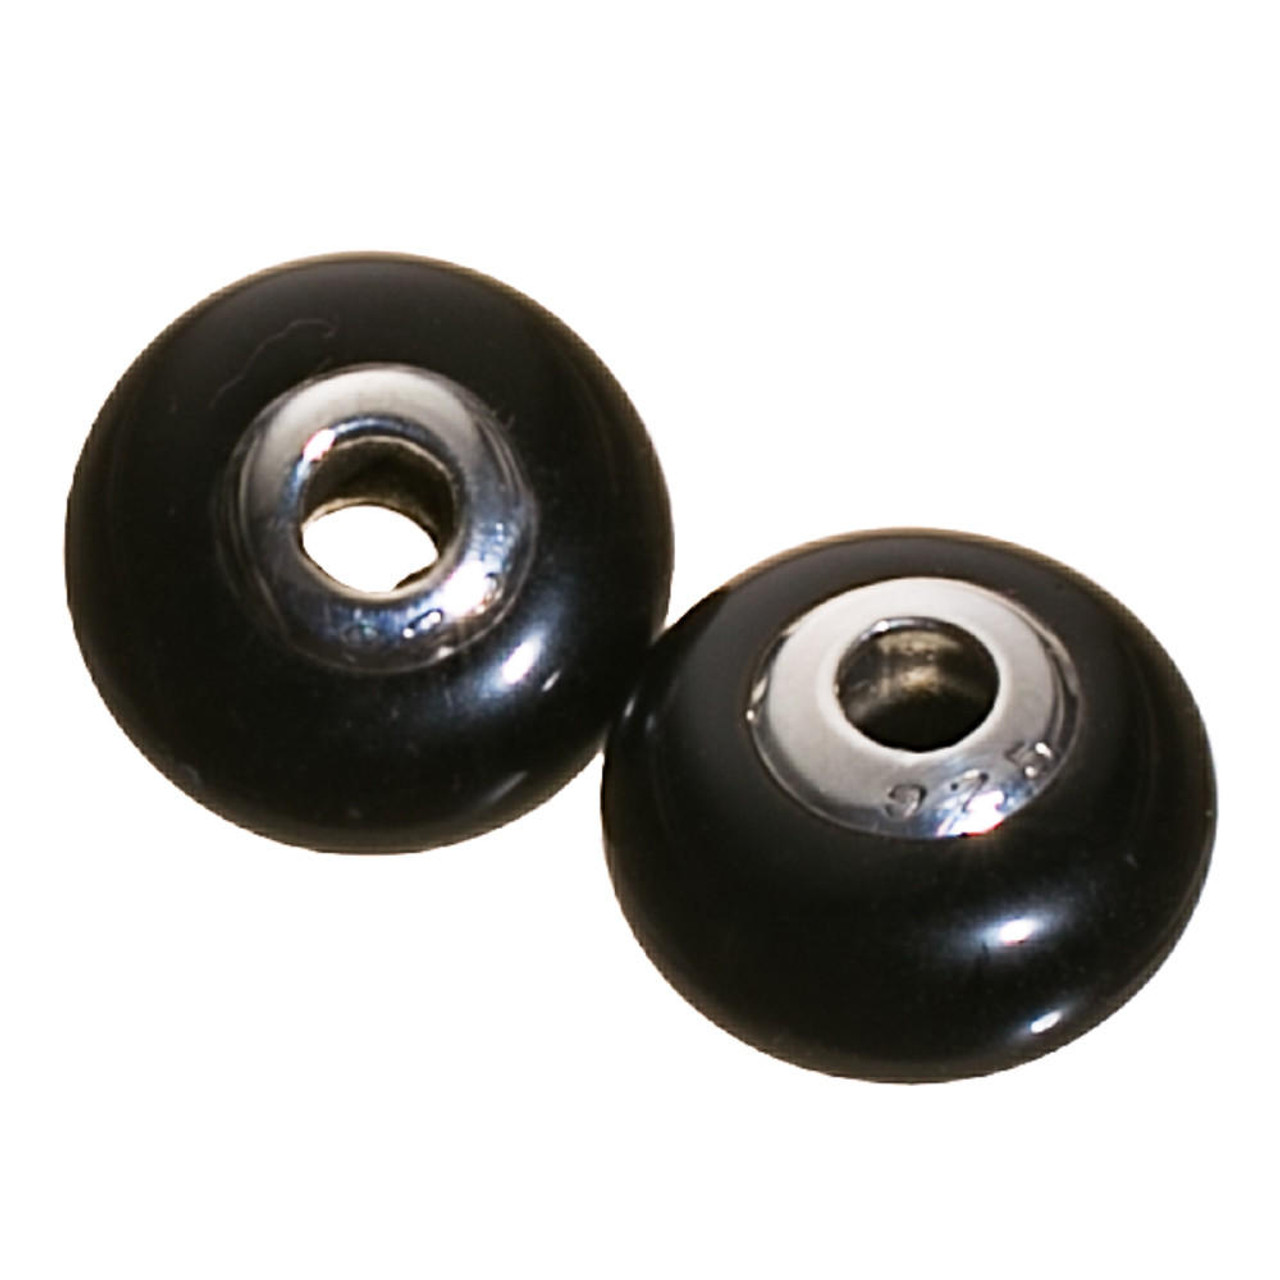 Beads Black Obsidian & Sterling Silver Bead- 2 pc-9x14mm OBS14f 